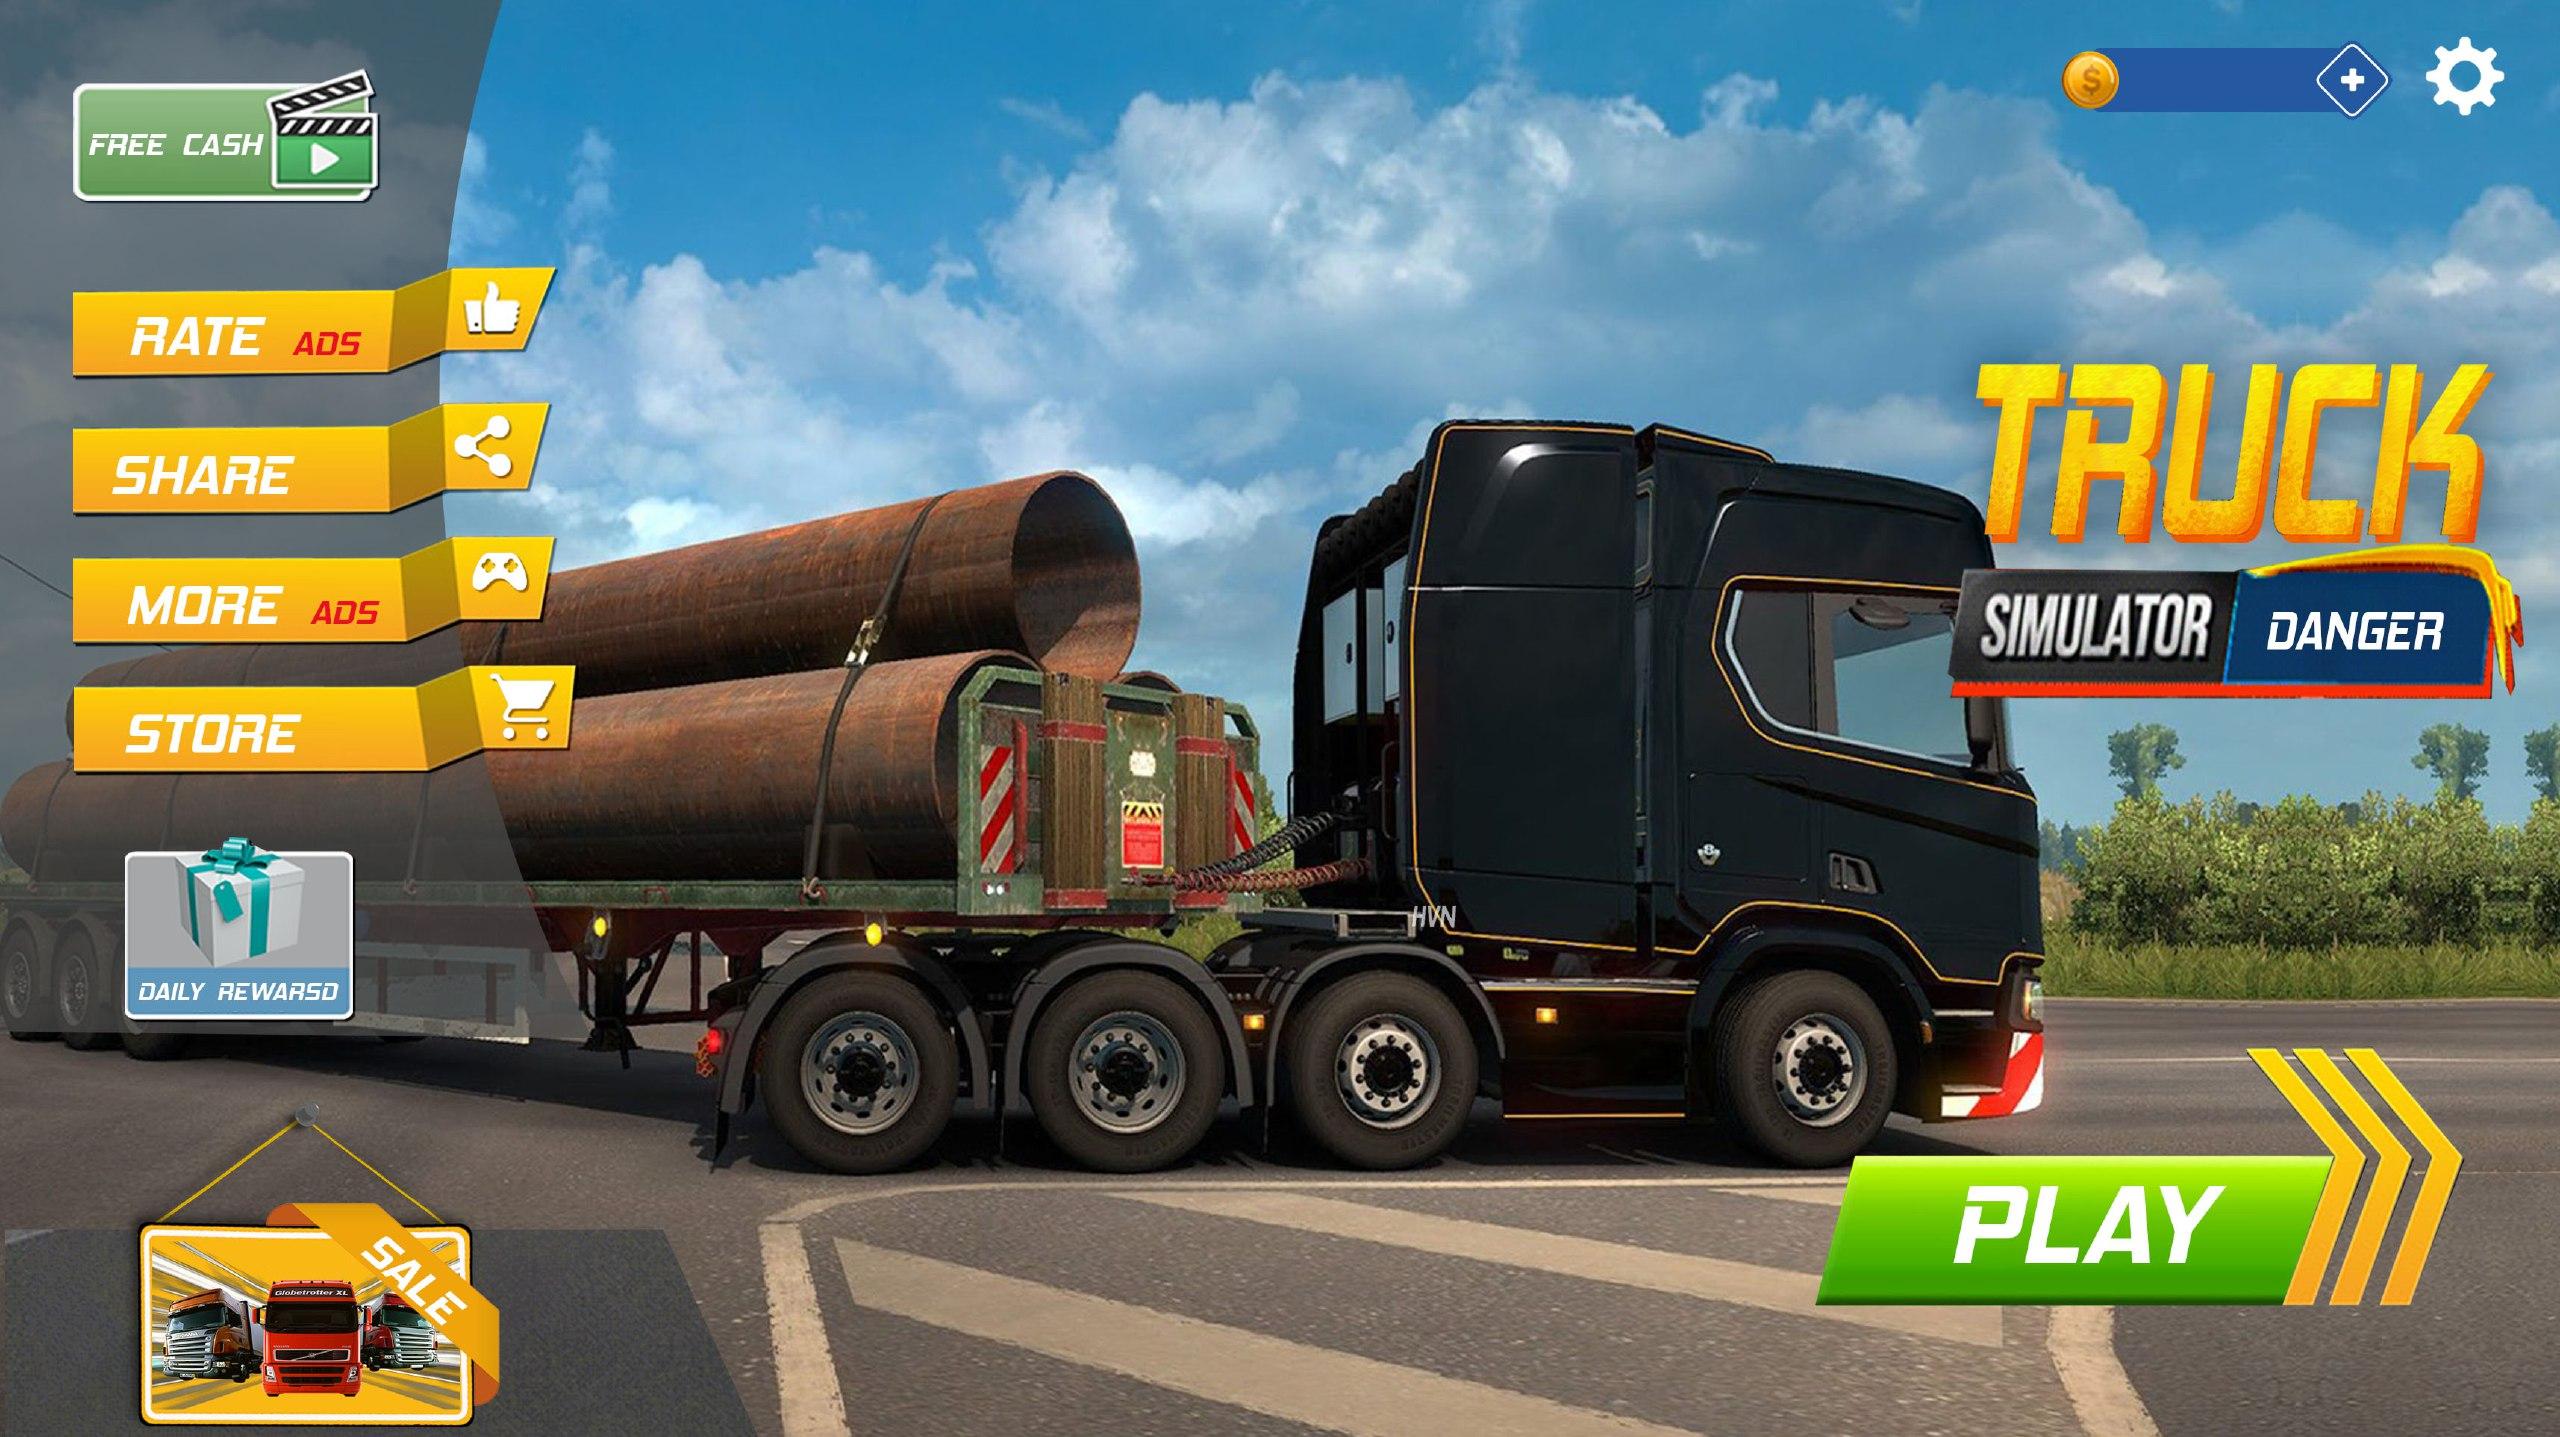 Truck Simulator Ultimate - Download & Play for Free Here